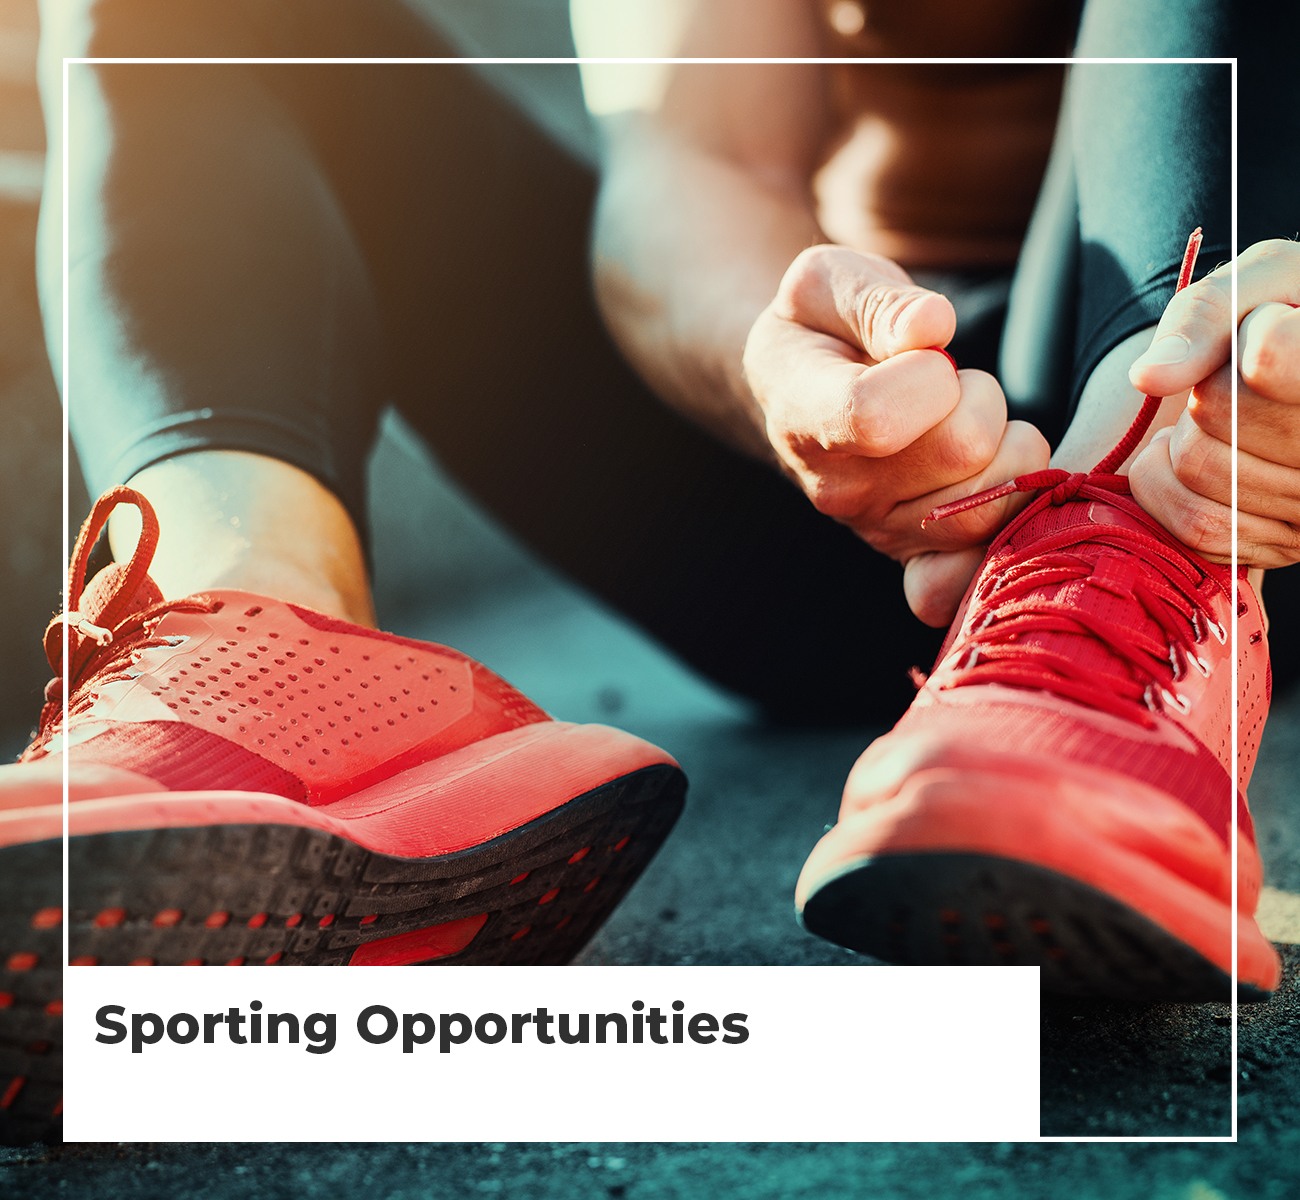 Sporting Opportunities - Main Image